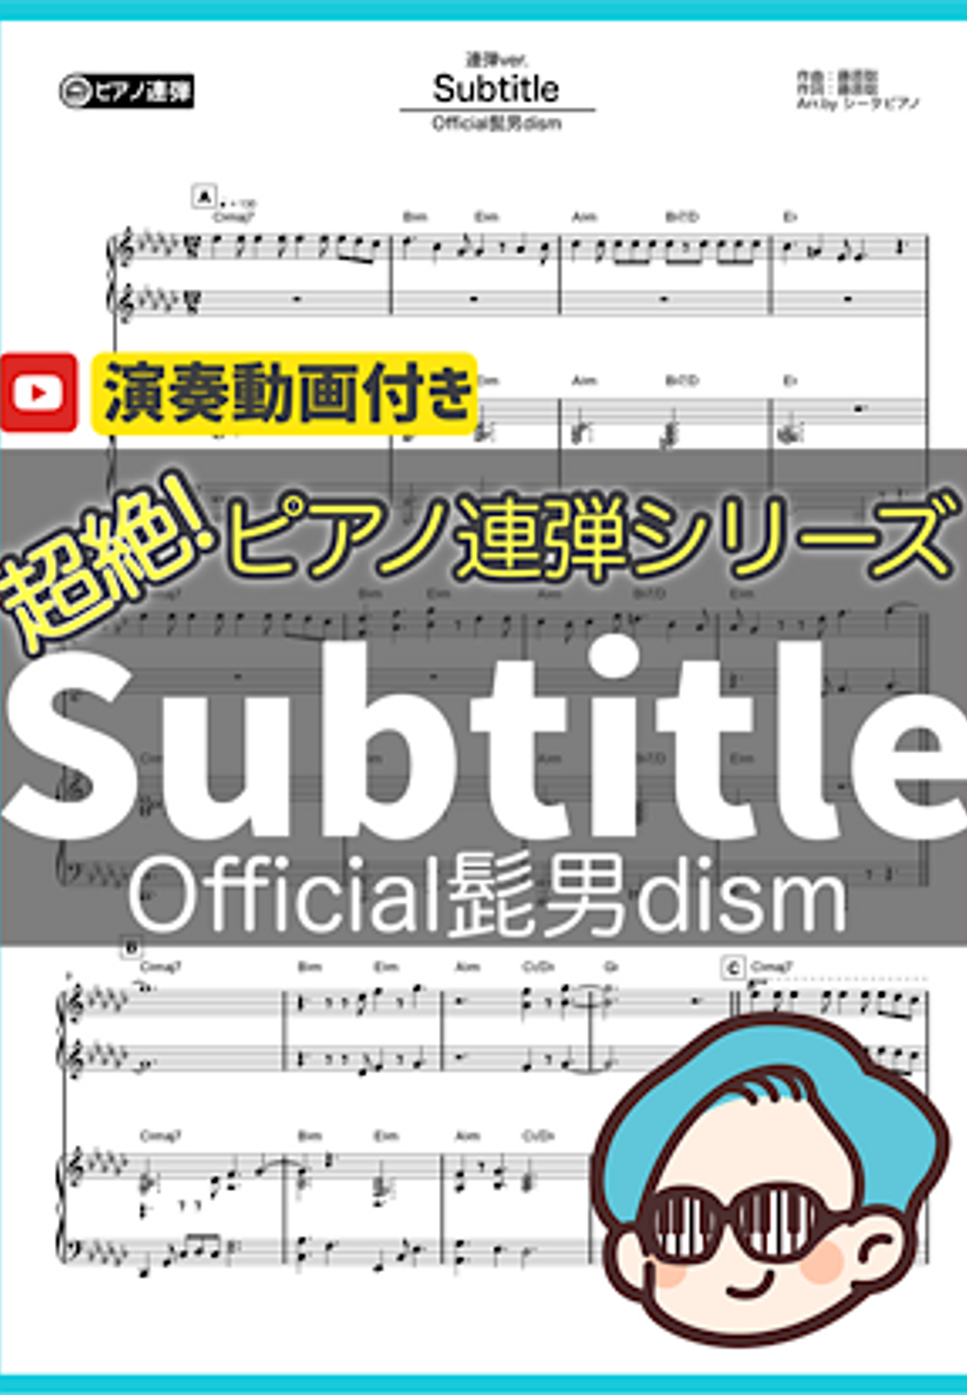 Official髭男dism - Subtitle(連弾ver.) by シータピアノ